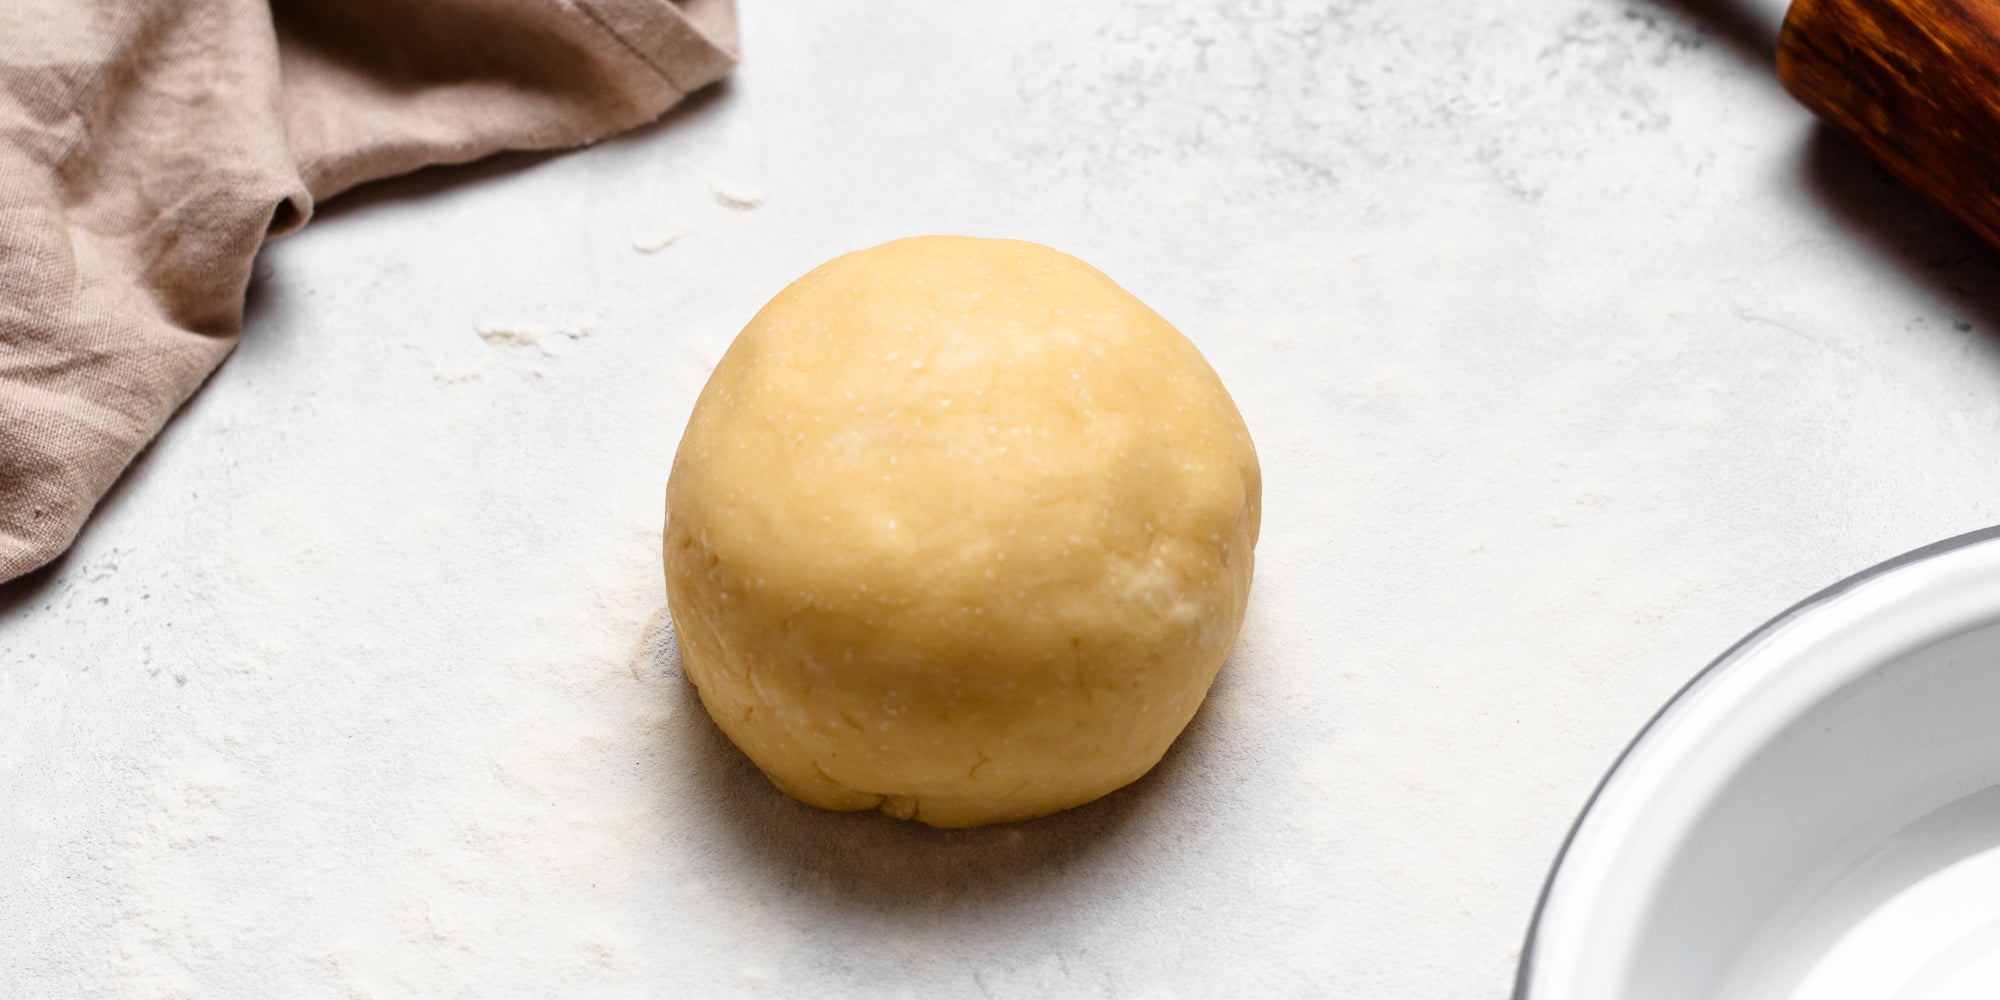 Ball of shortcrust pastry dough on a floured work surface